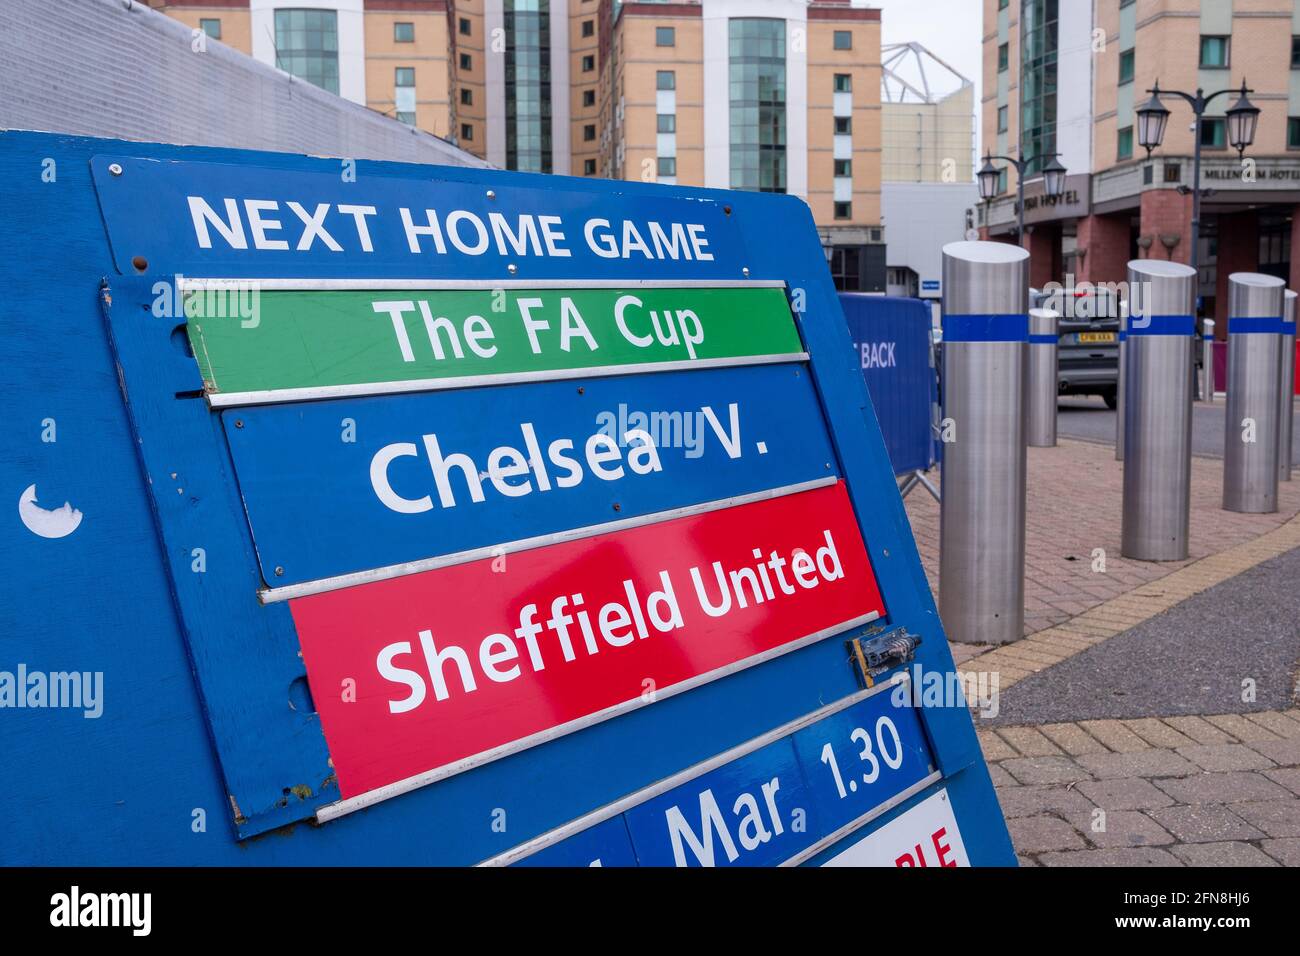 London: March 2021: Stamford Bridge, the home ground of Chelsea Football Club on Fulham Road in south west London Stock Photo